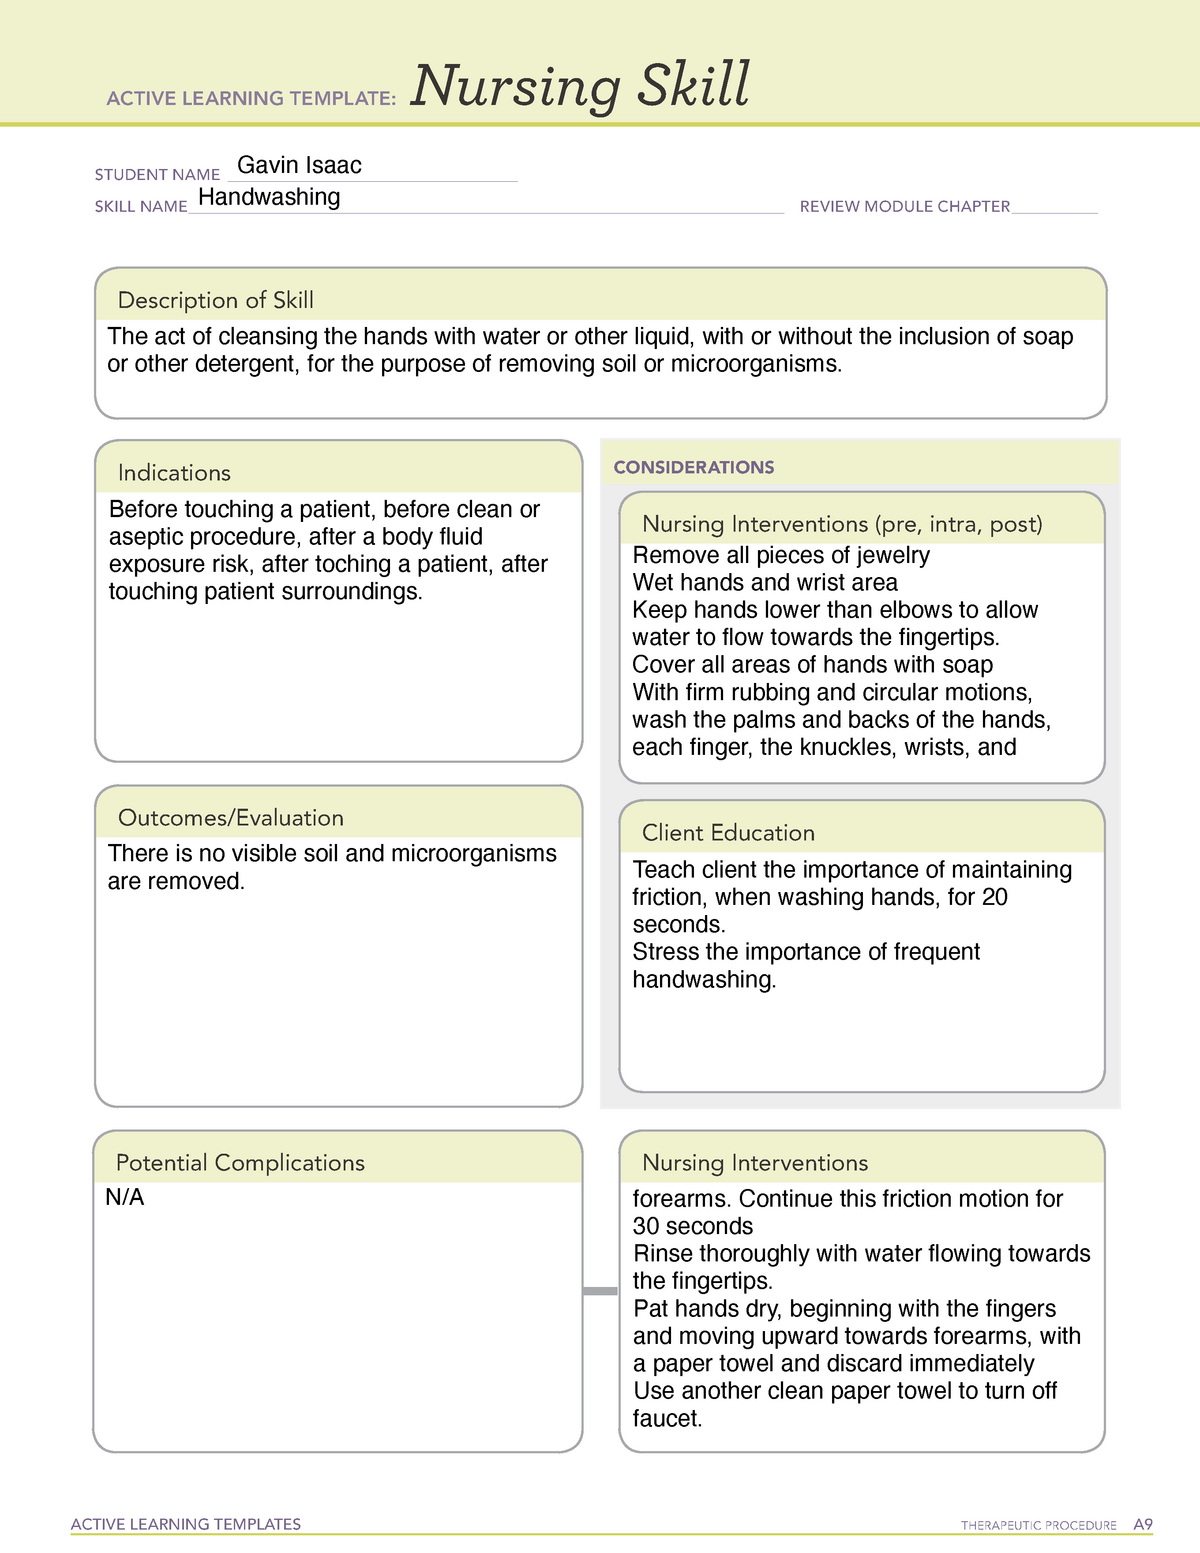 Skill Handwashing - Active Learning Template - ACTIVE LEARNING ...